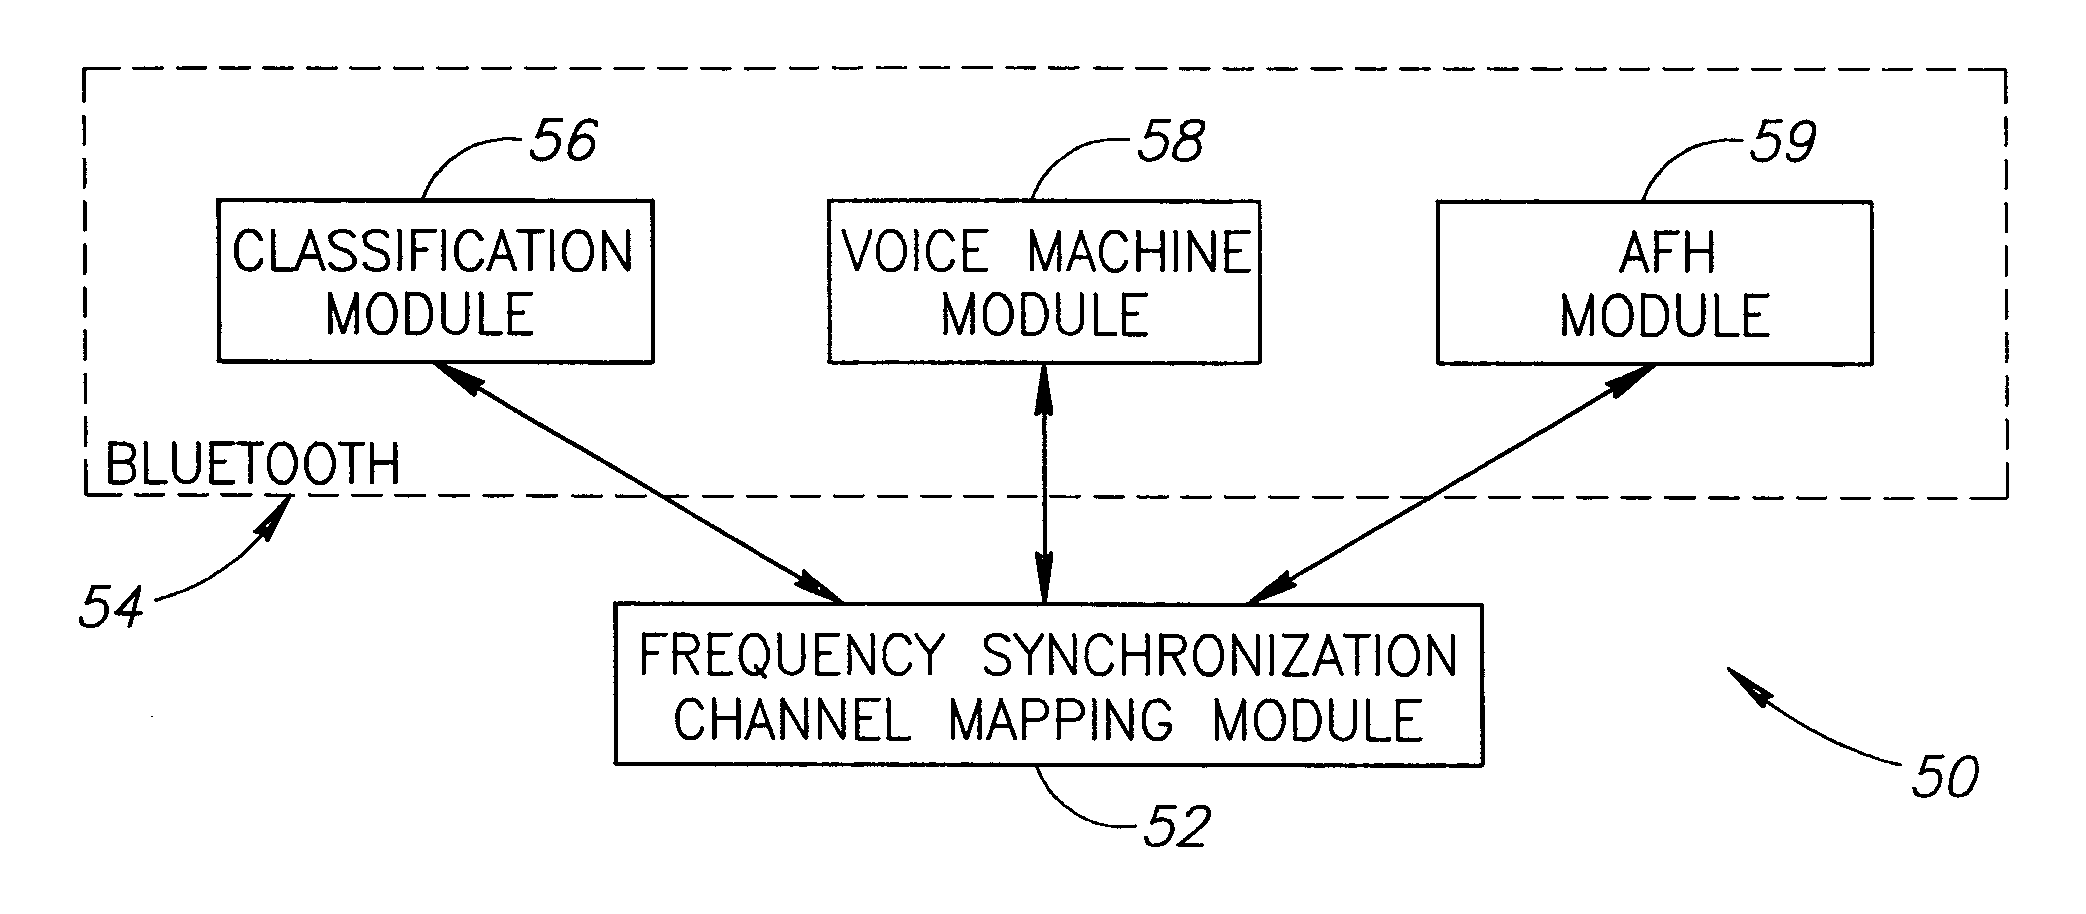 Radio frequency collision avoidance mechanism in wireless networks using frequency synchronization